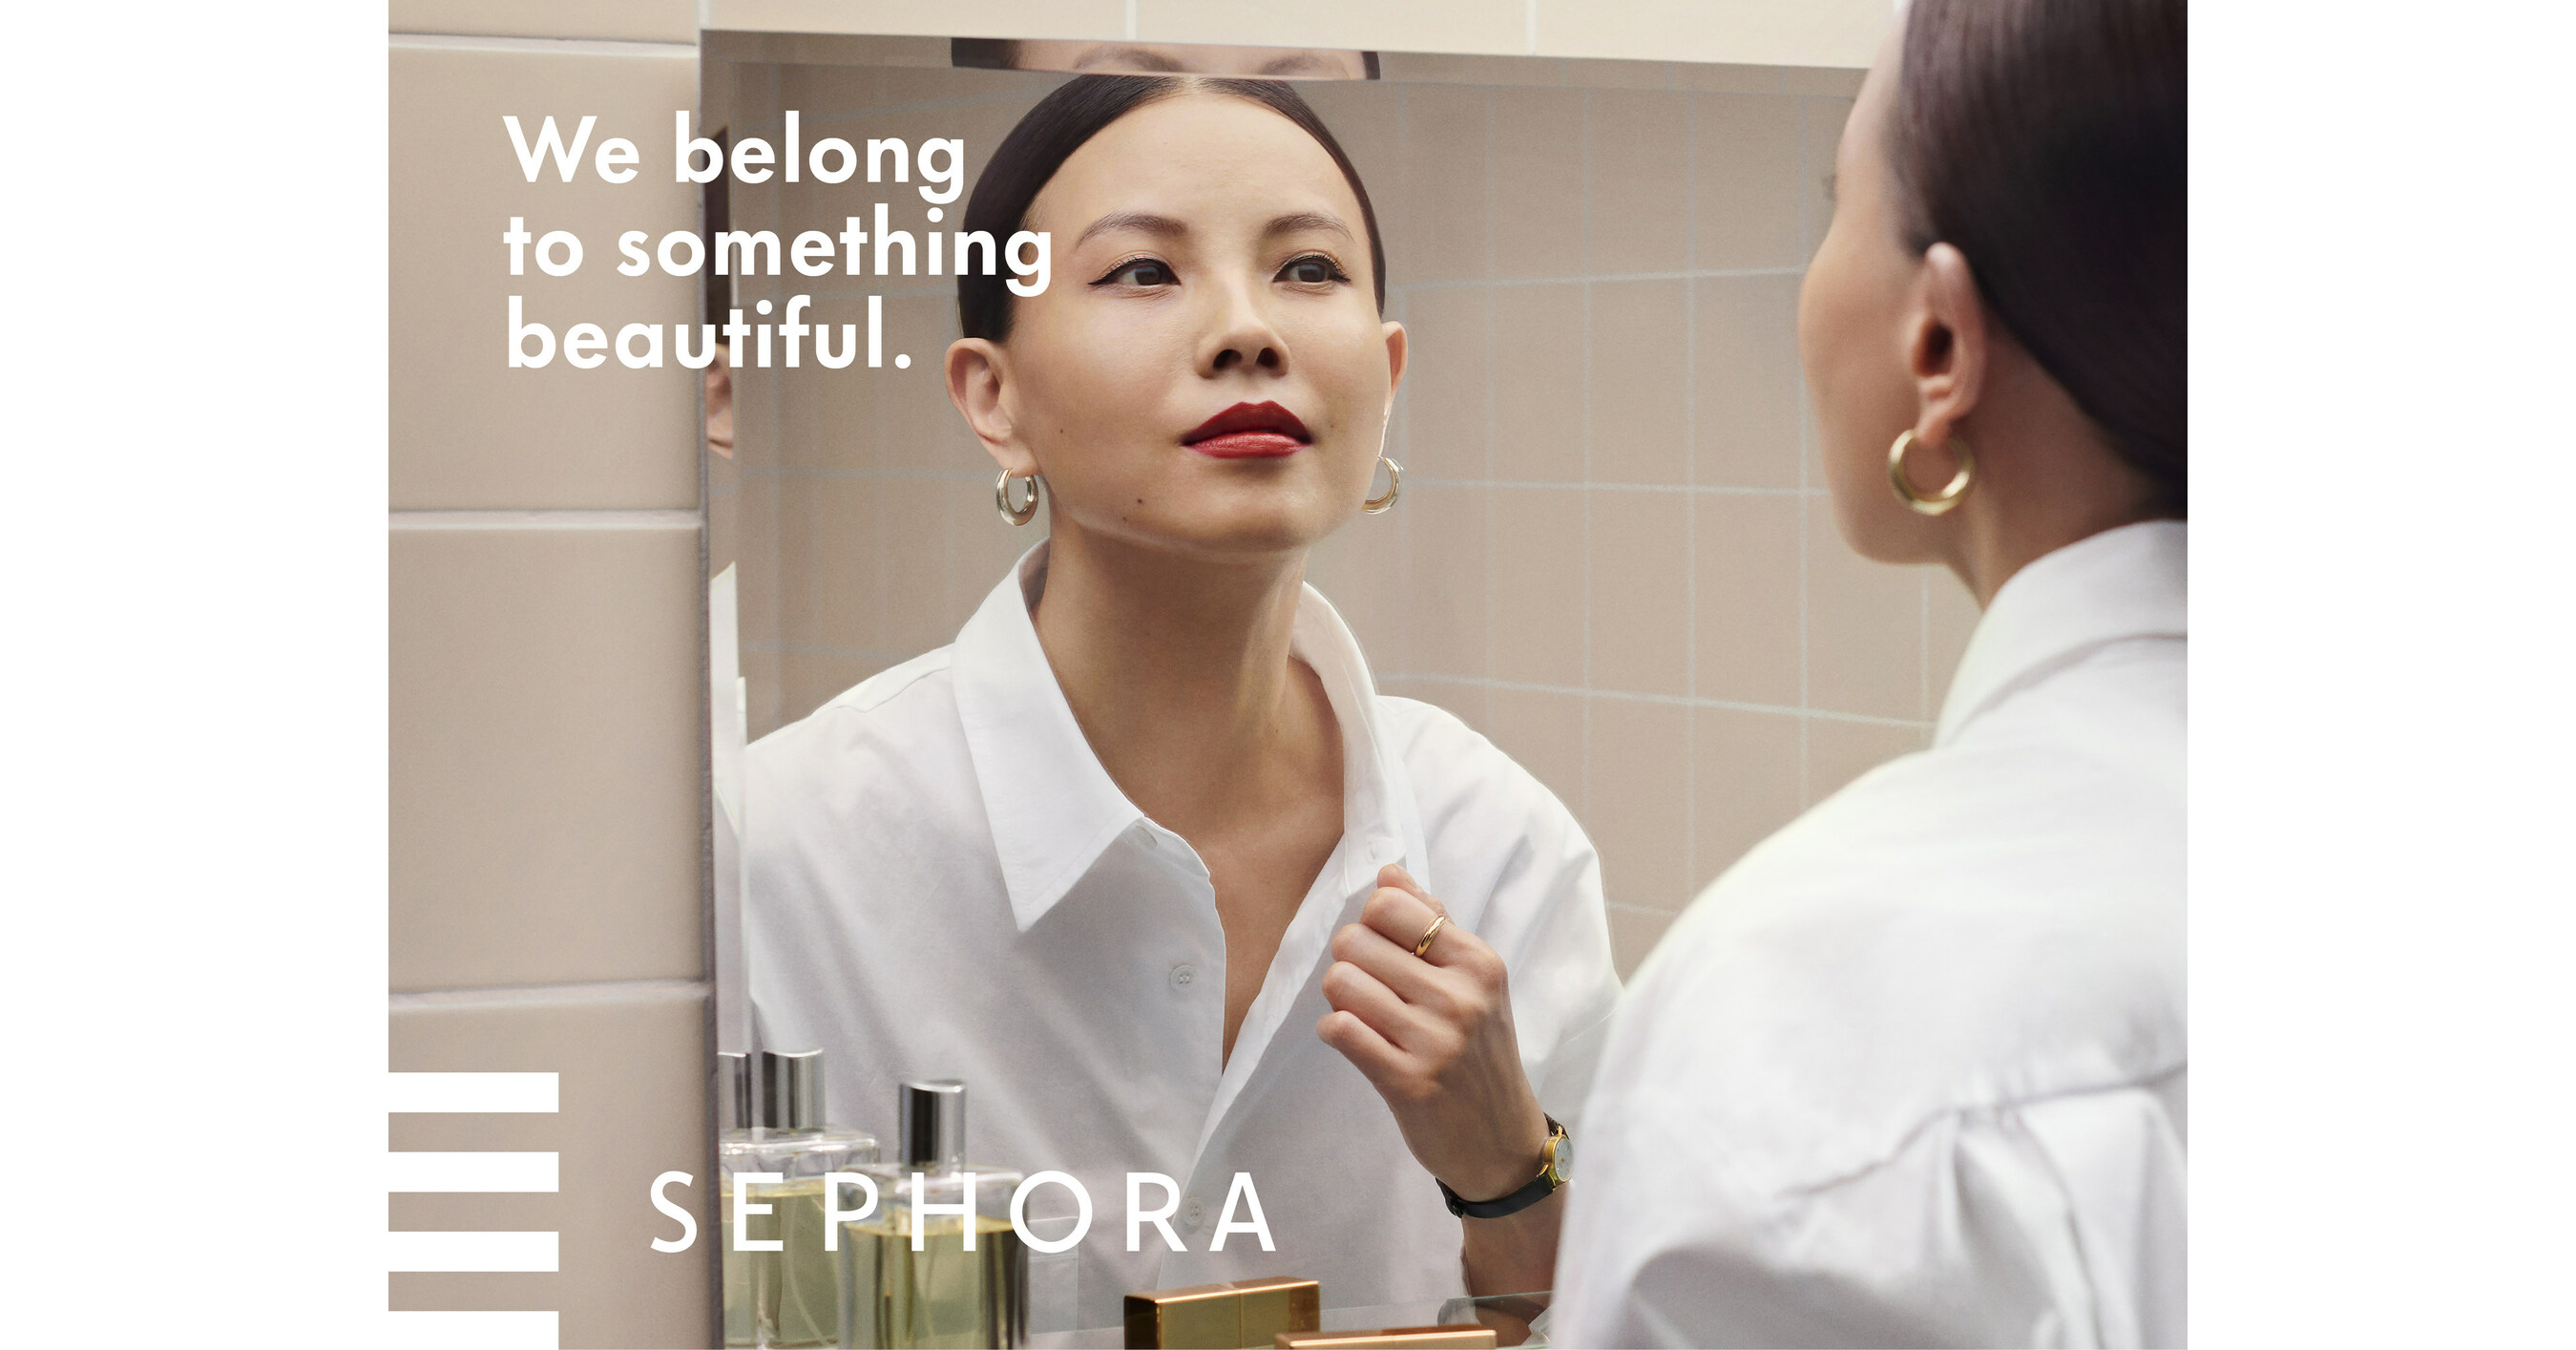 Sephora names Guillaume Motte as President and CEO 